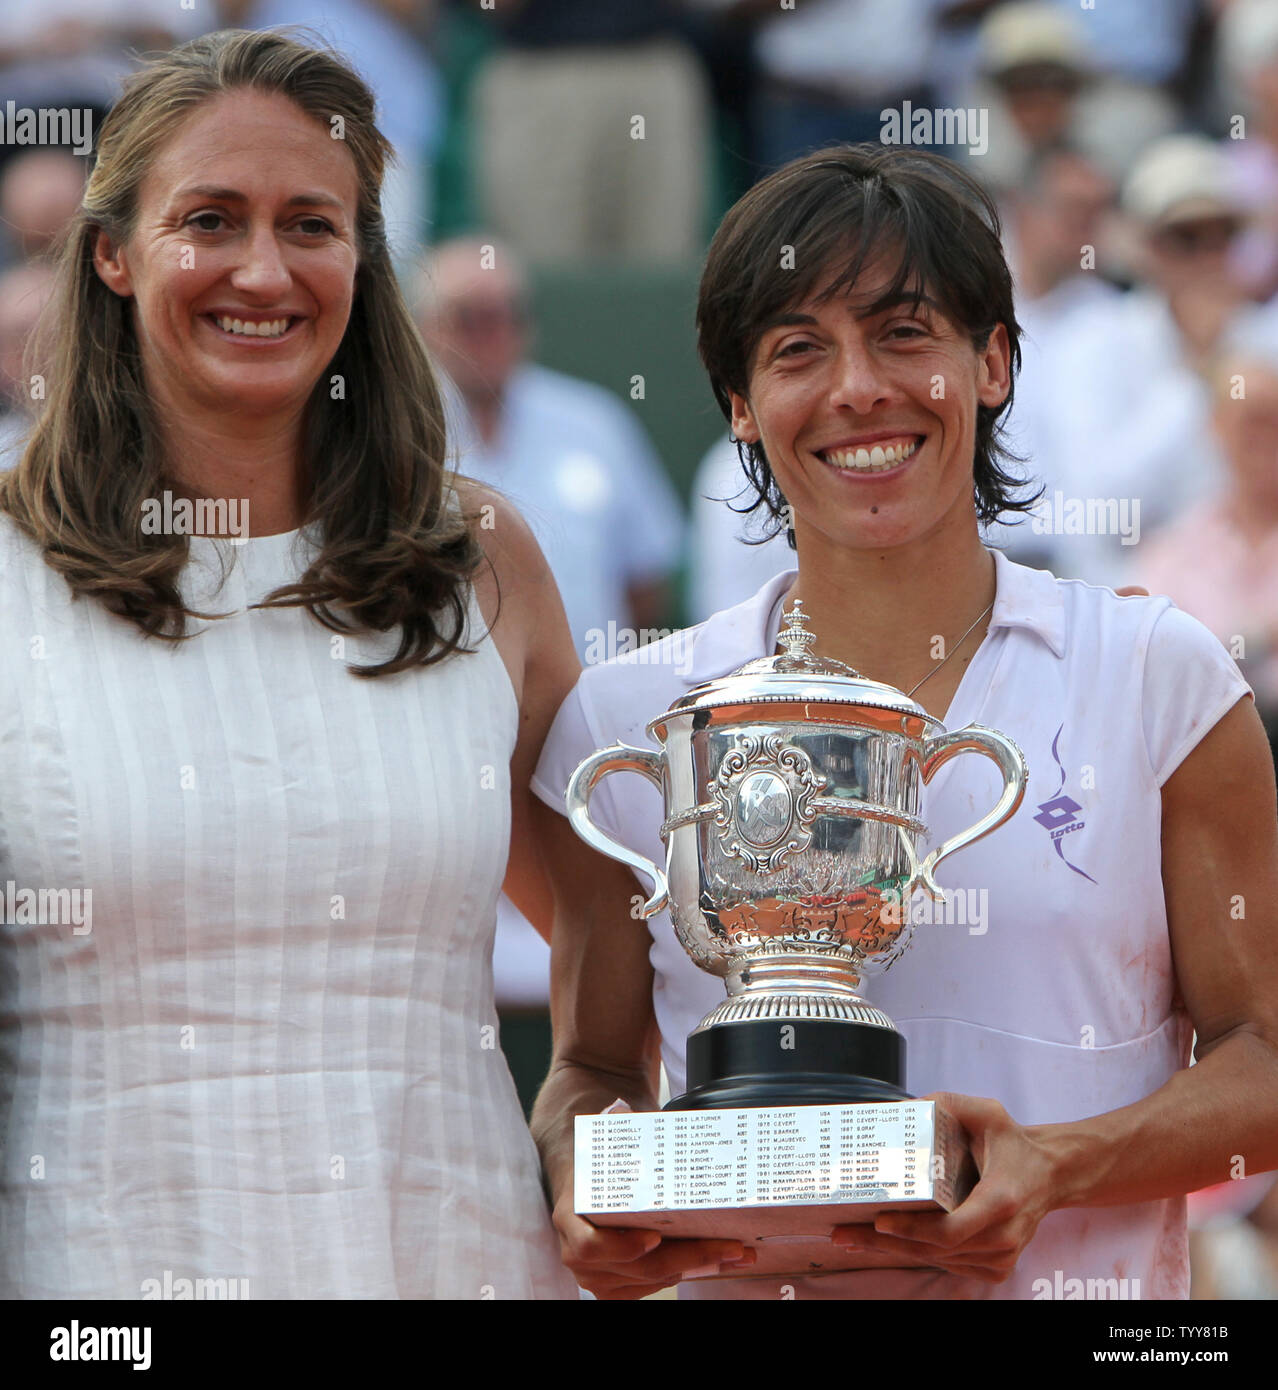 Italian Francesca Schiavone holds the championship trophy next to former tennis player Mary Pierce after Schiavone won her French Open womens final match against Australian Samantha Stosur at Roland Garros in Paris on June 5, 2010.  Schiavone defeated Stosur 6-4, 7-6(2) to become the first Italian ever to win a Grand Slam title.   UPI/David Silpa Stock Photo